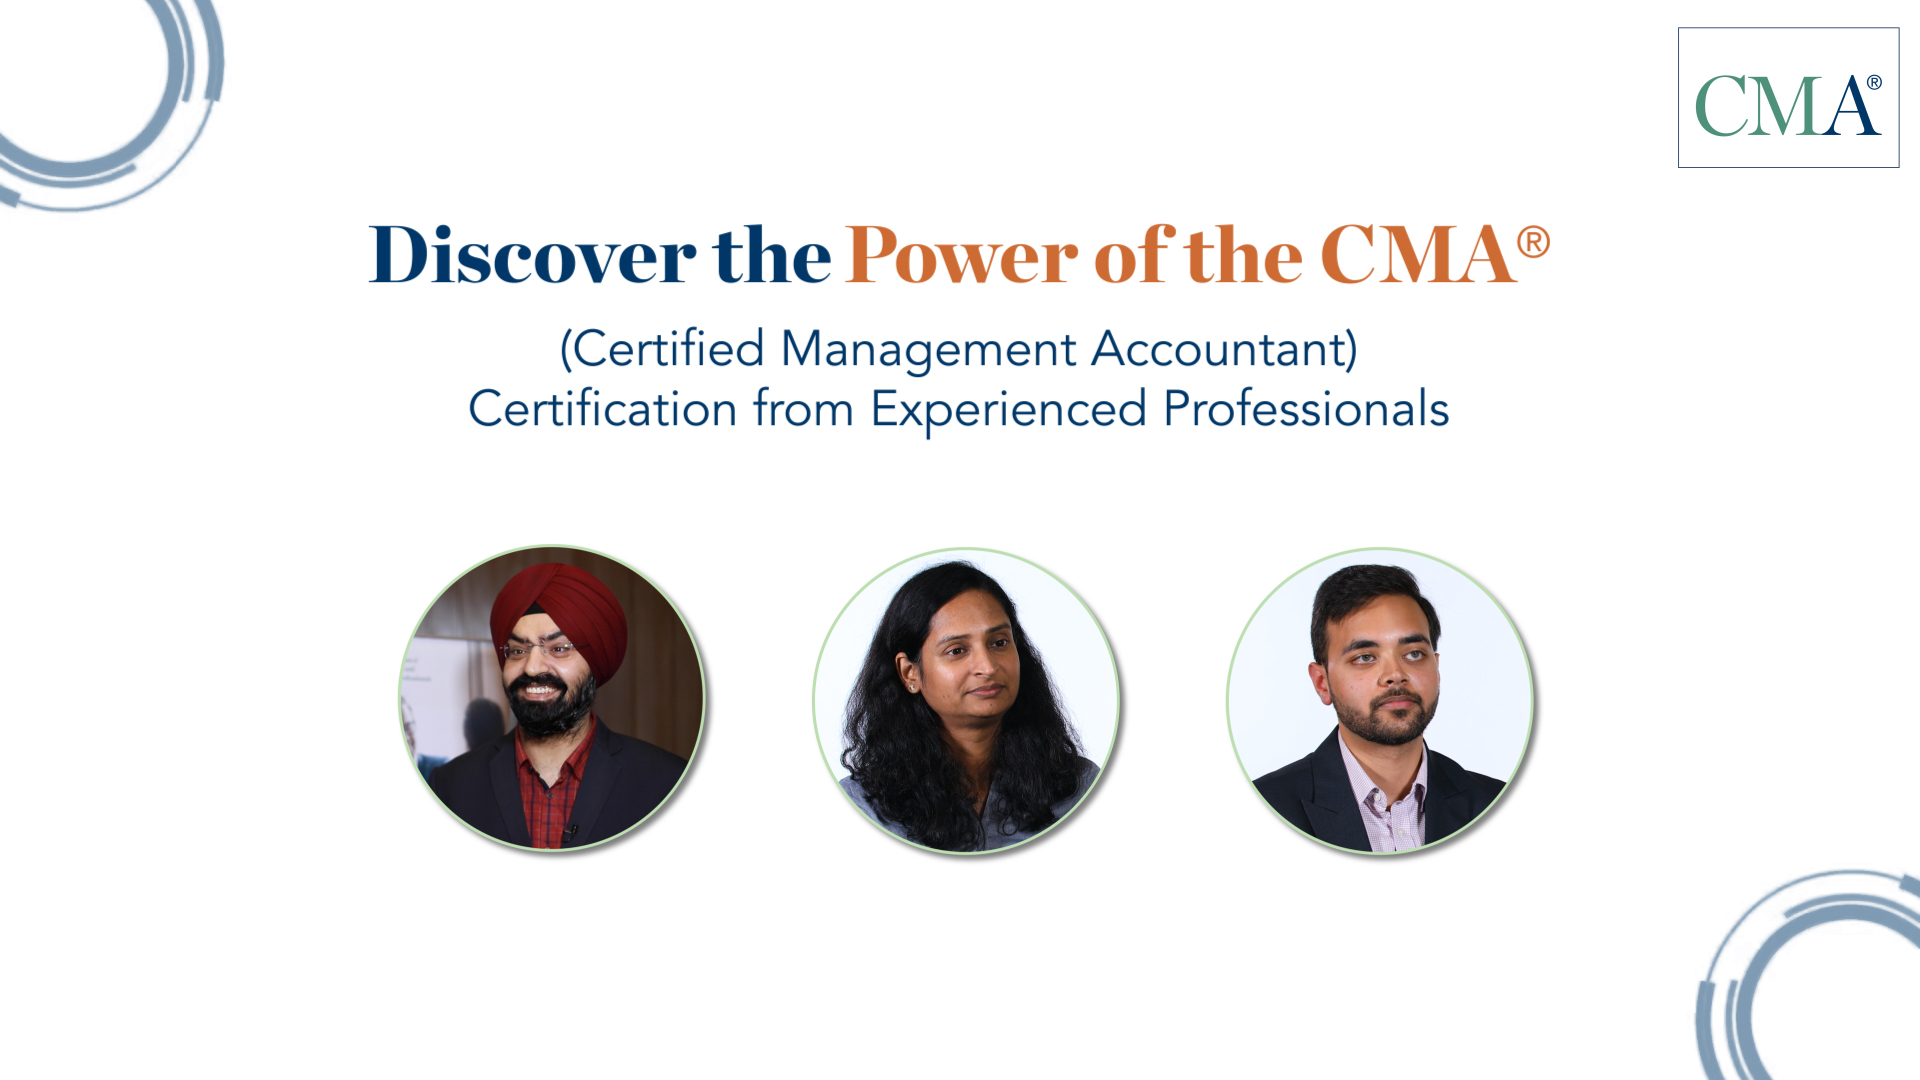 Discover the Power of the CMA